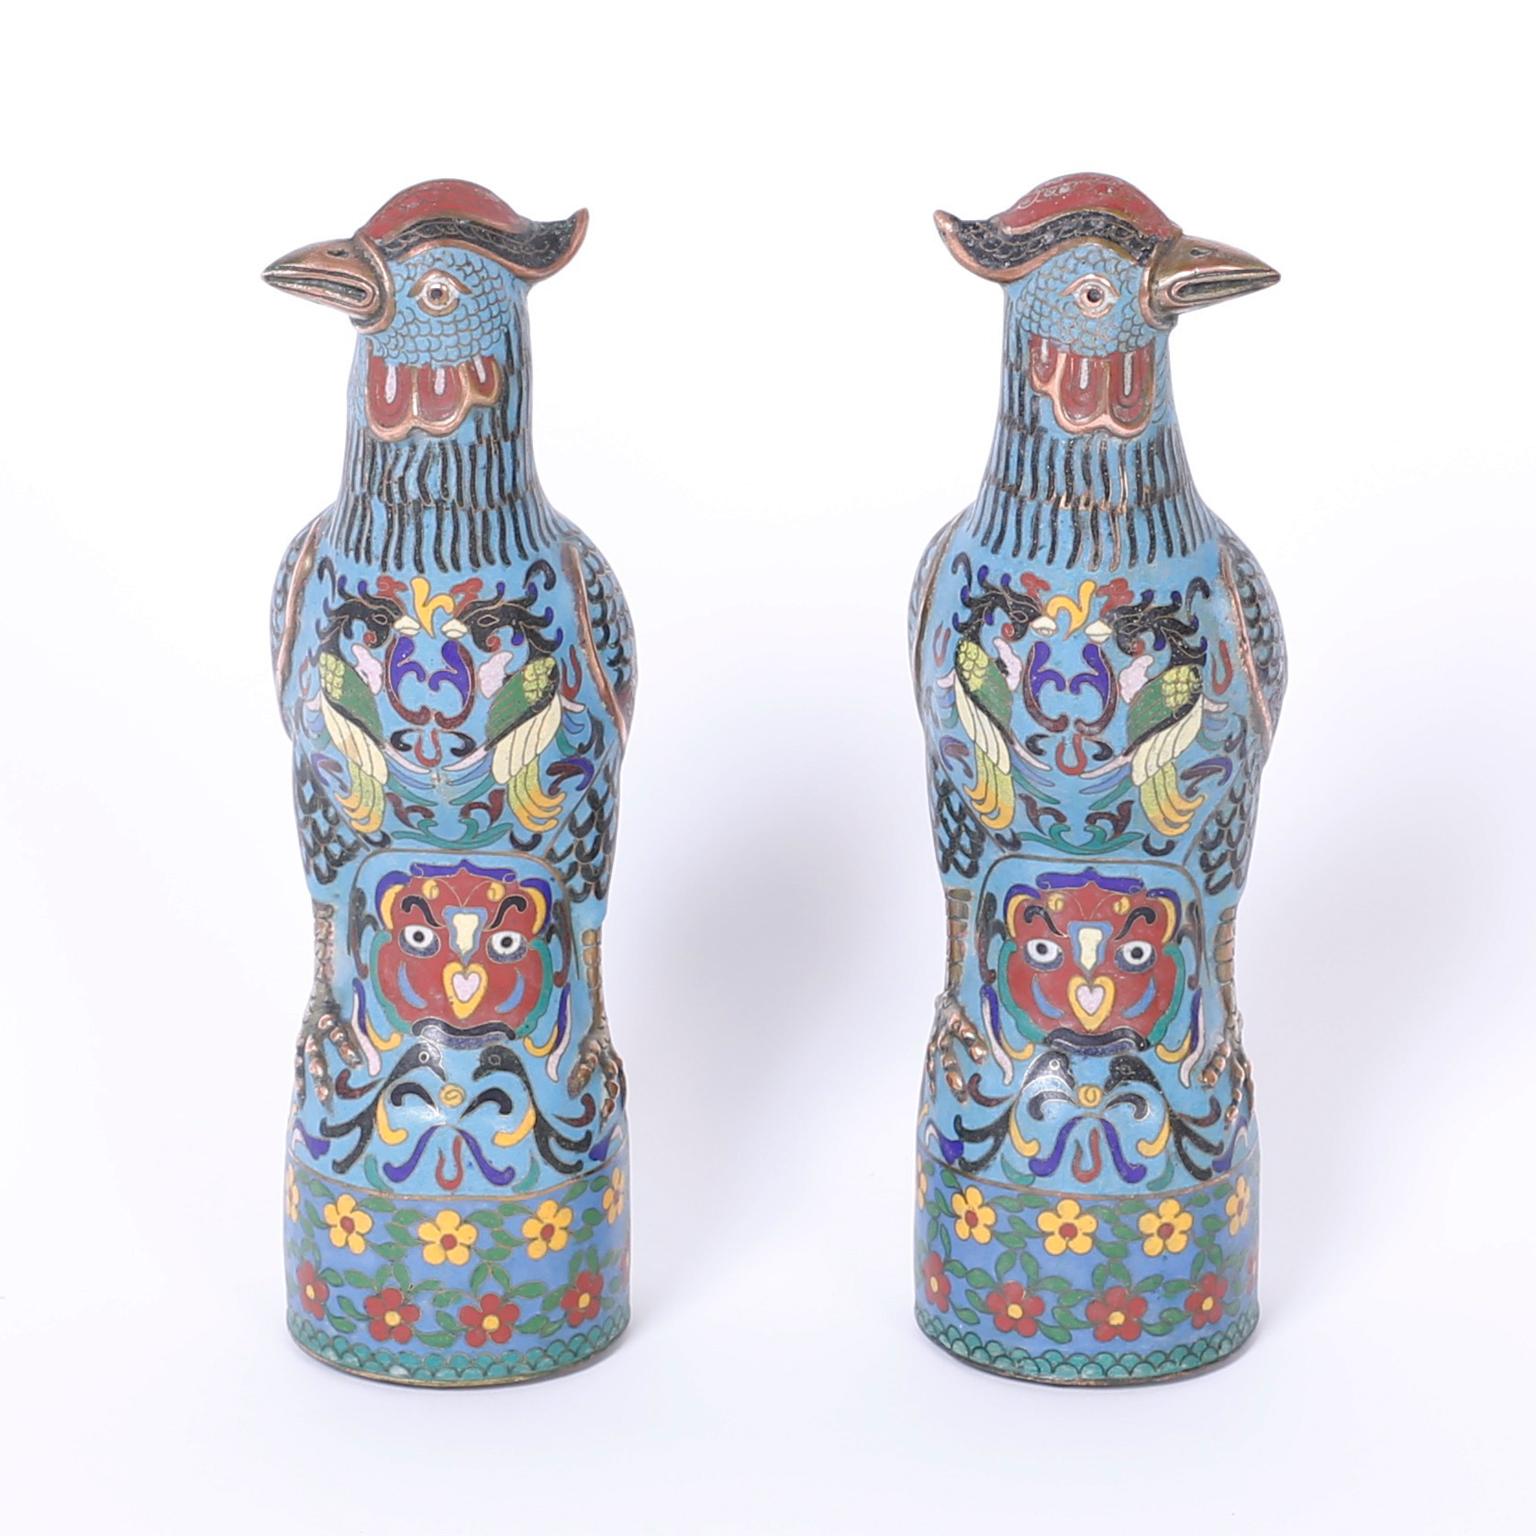 Lofty pair of antique cloisonné birds crafted with copper and
decorated with multi-color enamel designs of fauna and flora over a
blue field.